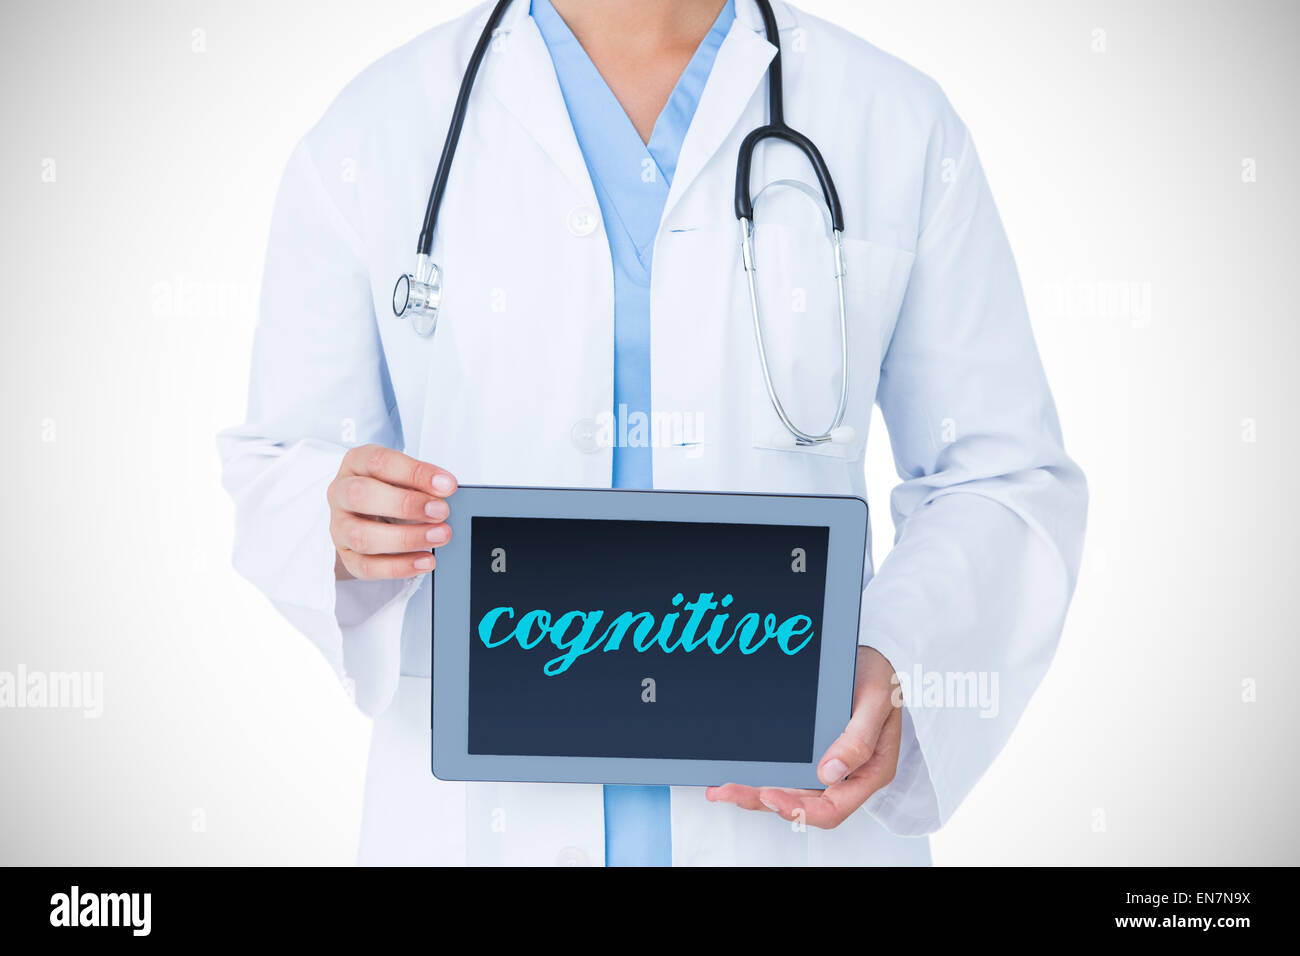 Cognitive against doctor showing tablet pc Stock Photo